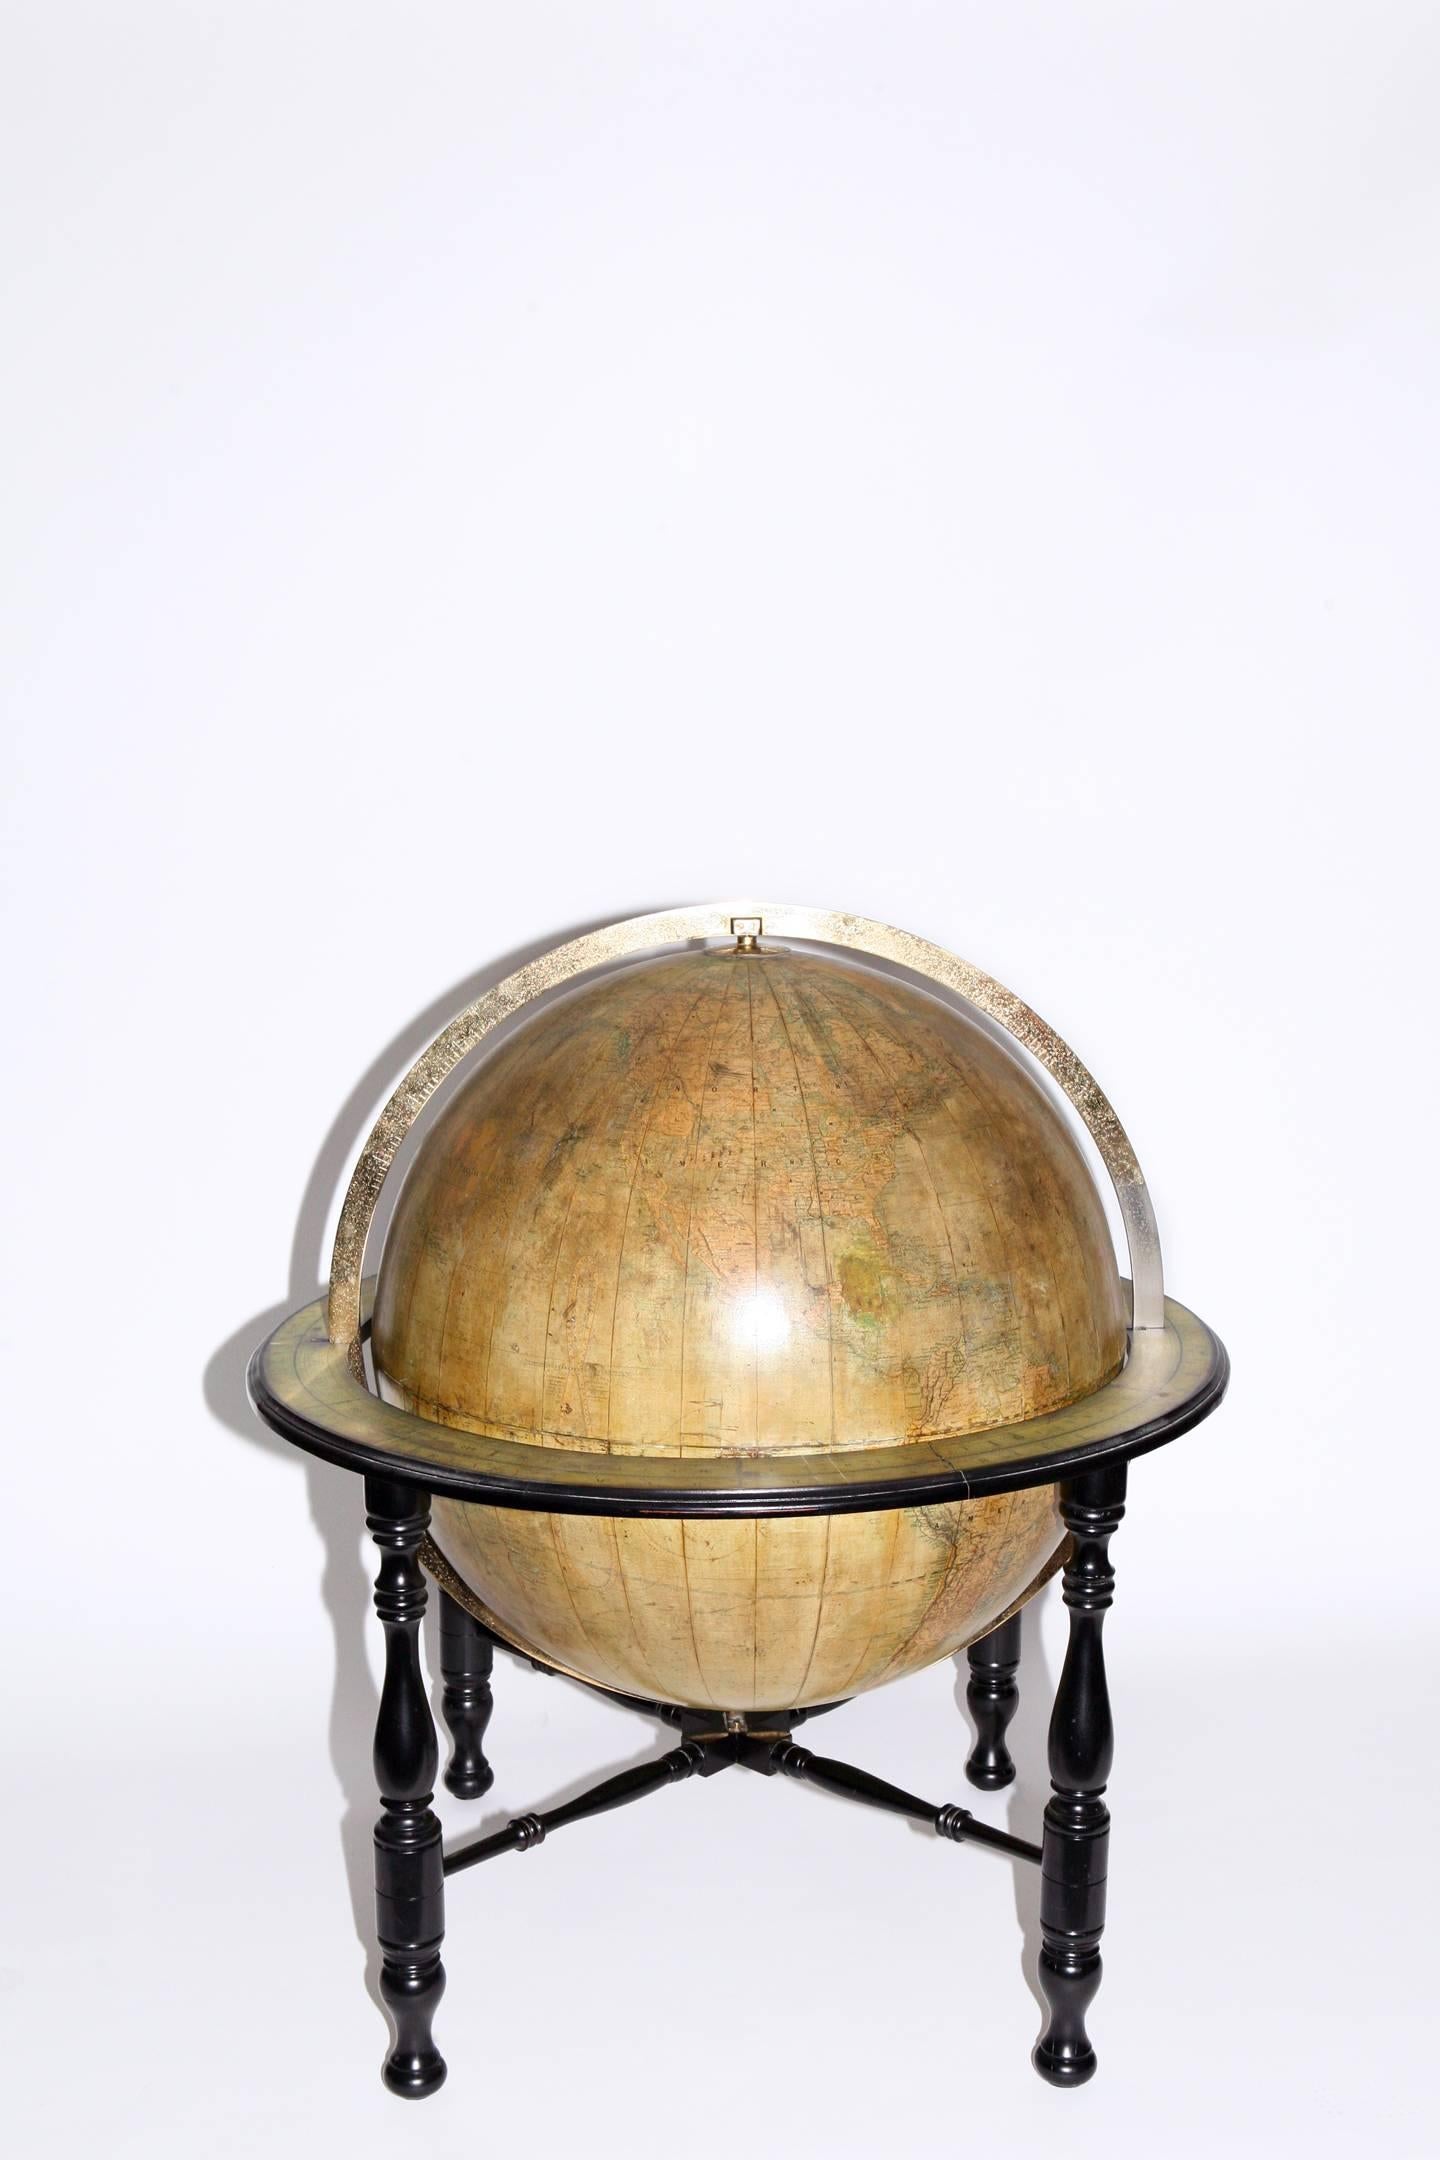 30 inch diameter library globe featuring Oklahoma with Indian territory, circa 1890. Maker is Johnston, Edinburgh, Scotland, a renowned British globe producer. Mounted on ebonised turned leg Stand with cross stretchers featuring brass meridian and